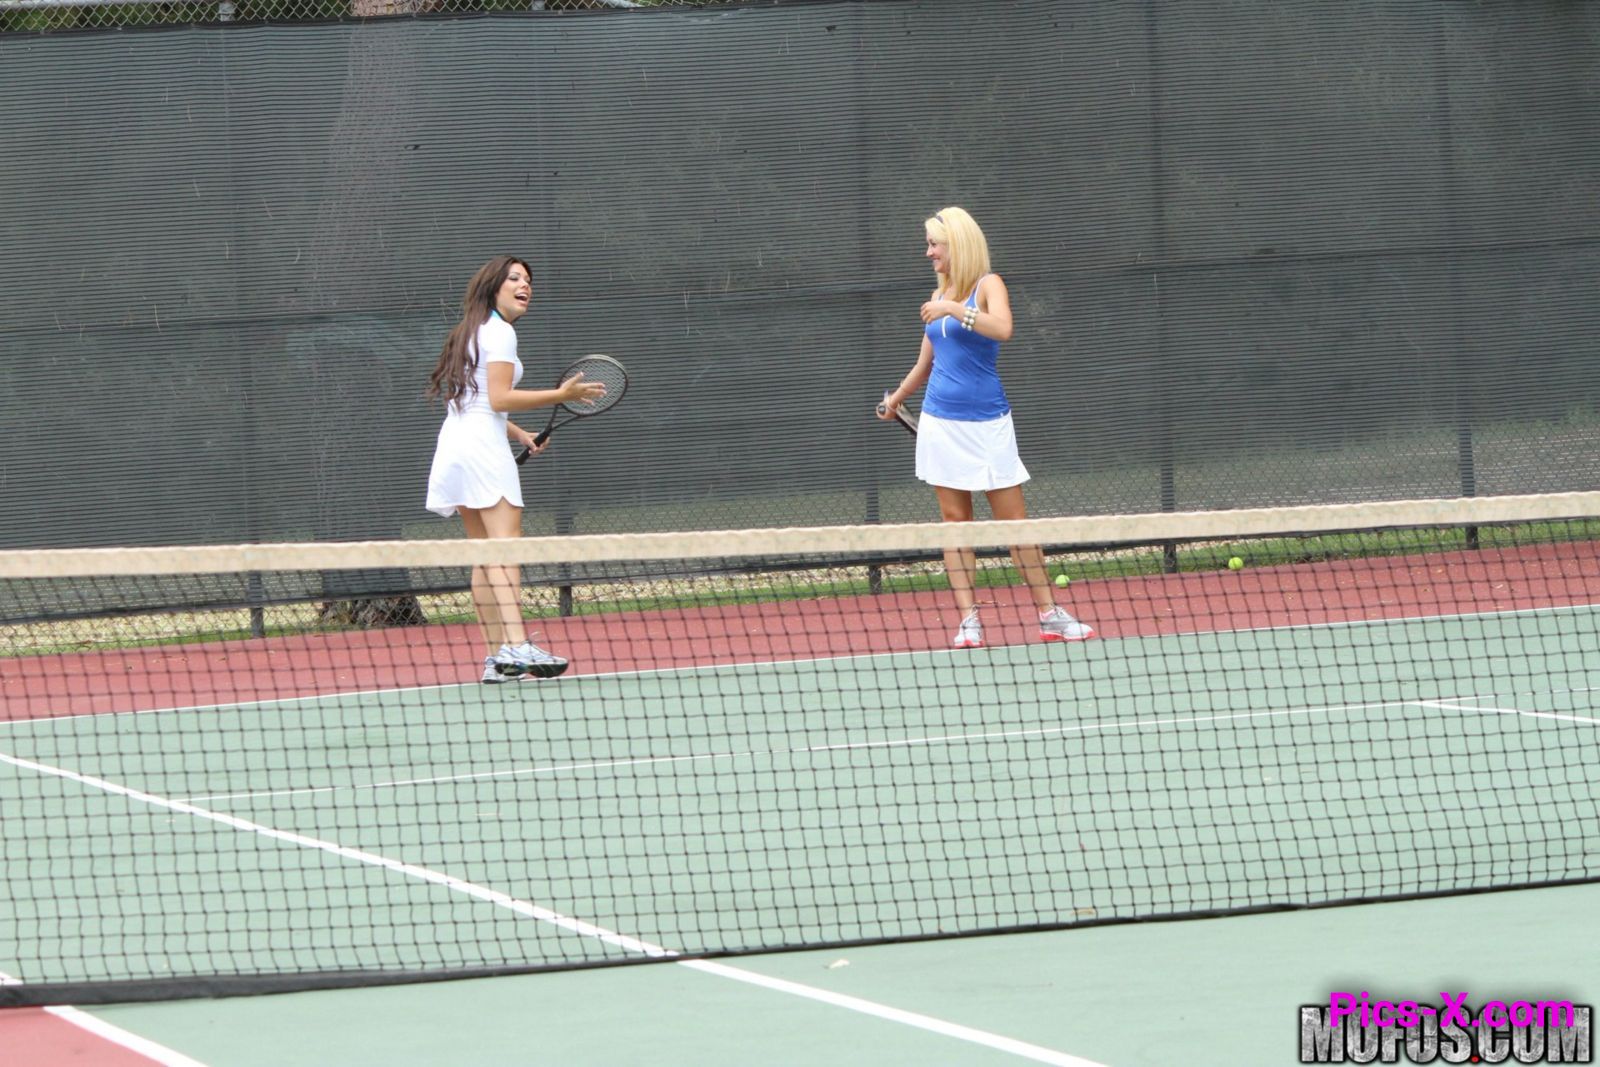 Tennis Lessons: How to Handle the Balls - Pervs On Patrol - Image 1